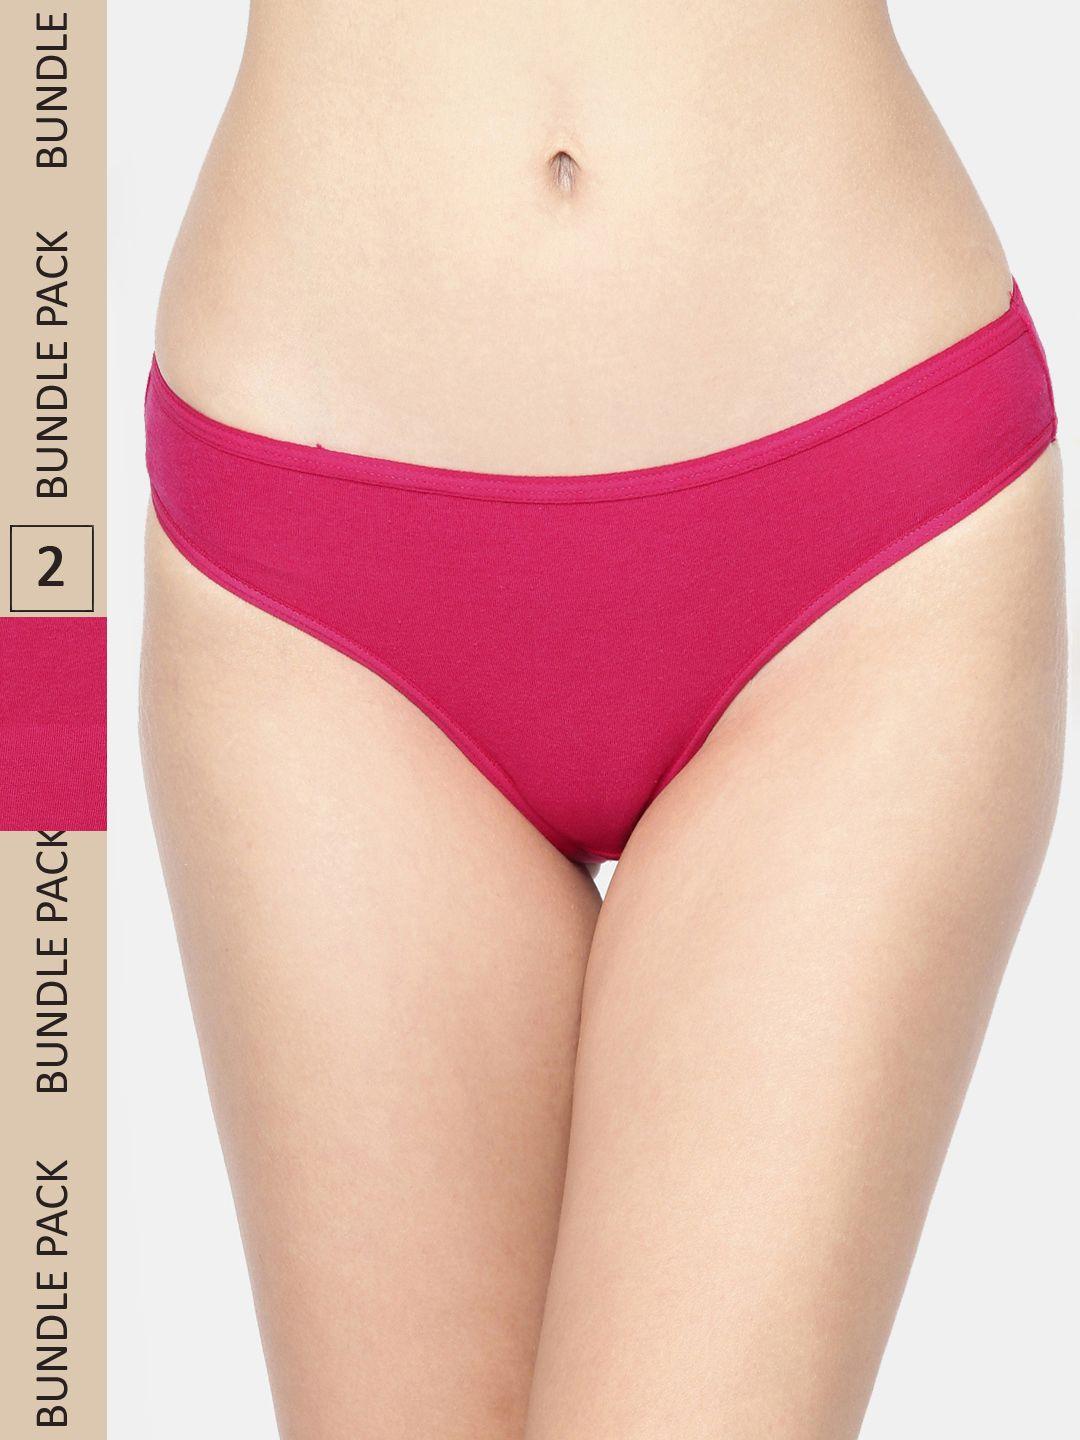 inner sense women pack of 2 fuchsia pink solid antimicrobial sustainable bikini briefs impc004